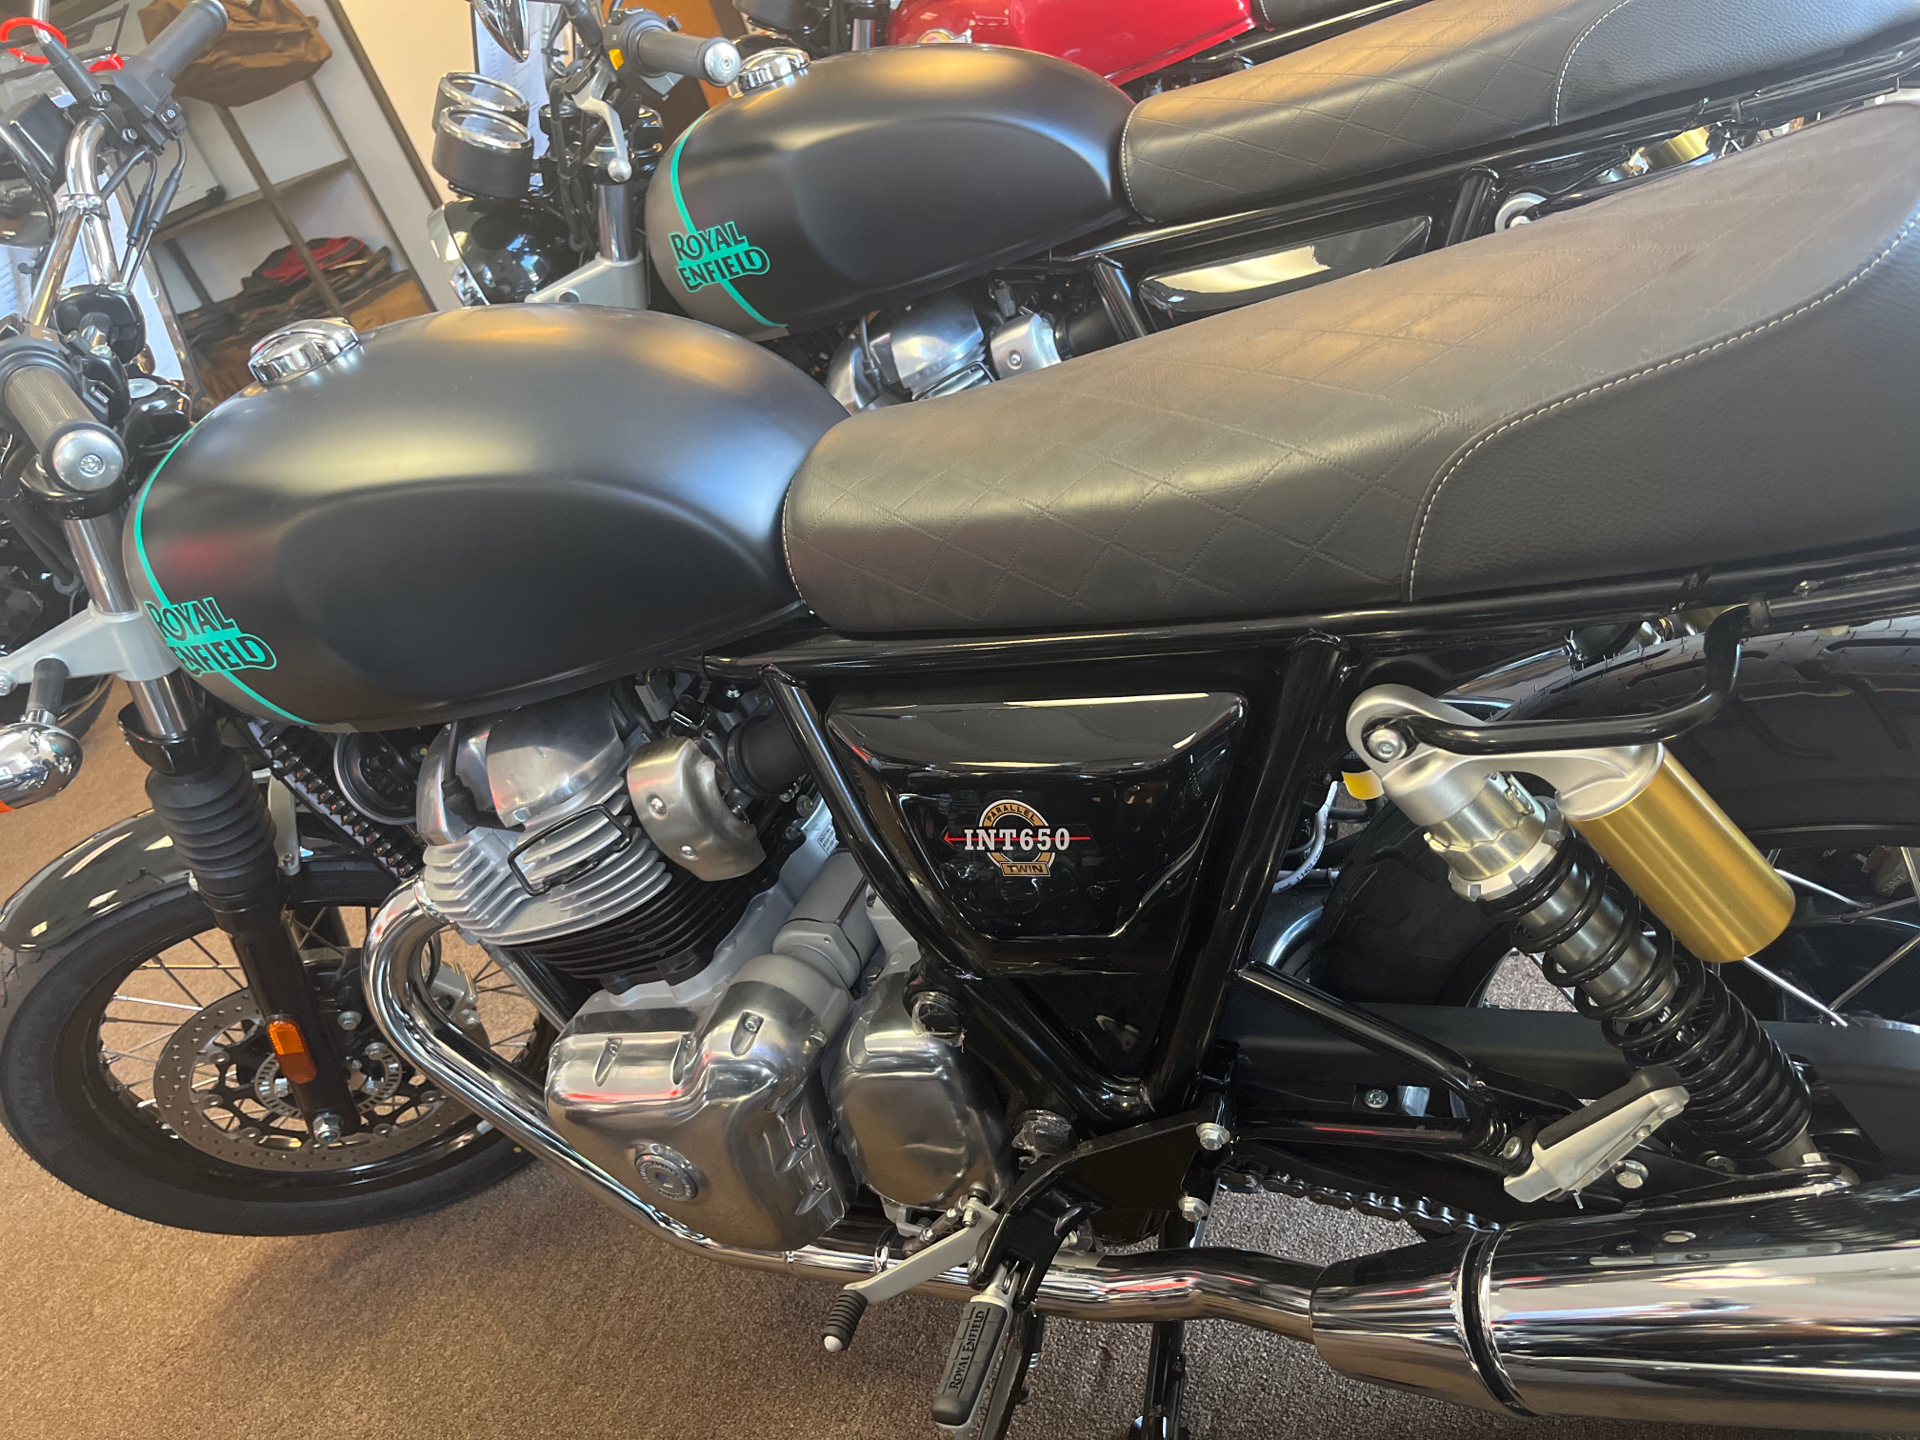 2022 Royal Enfield INT650 in Fort Wayne, Indiana - Photo 2